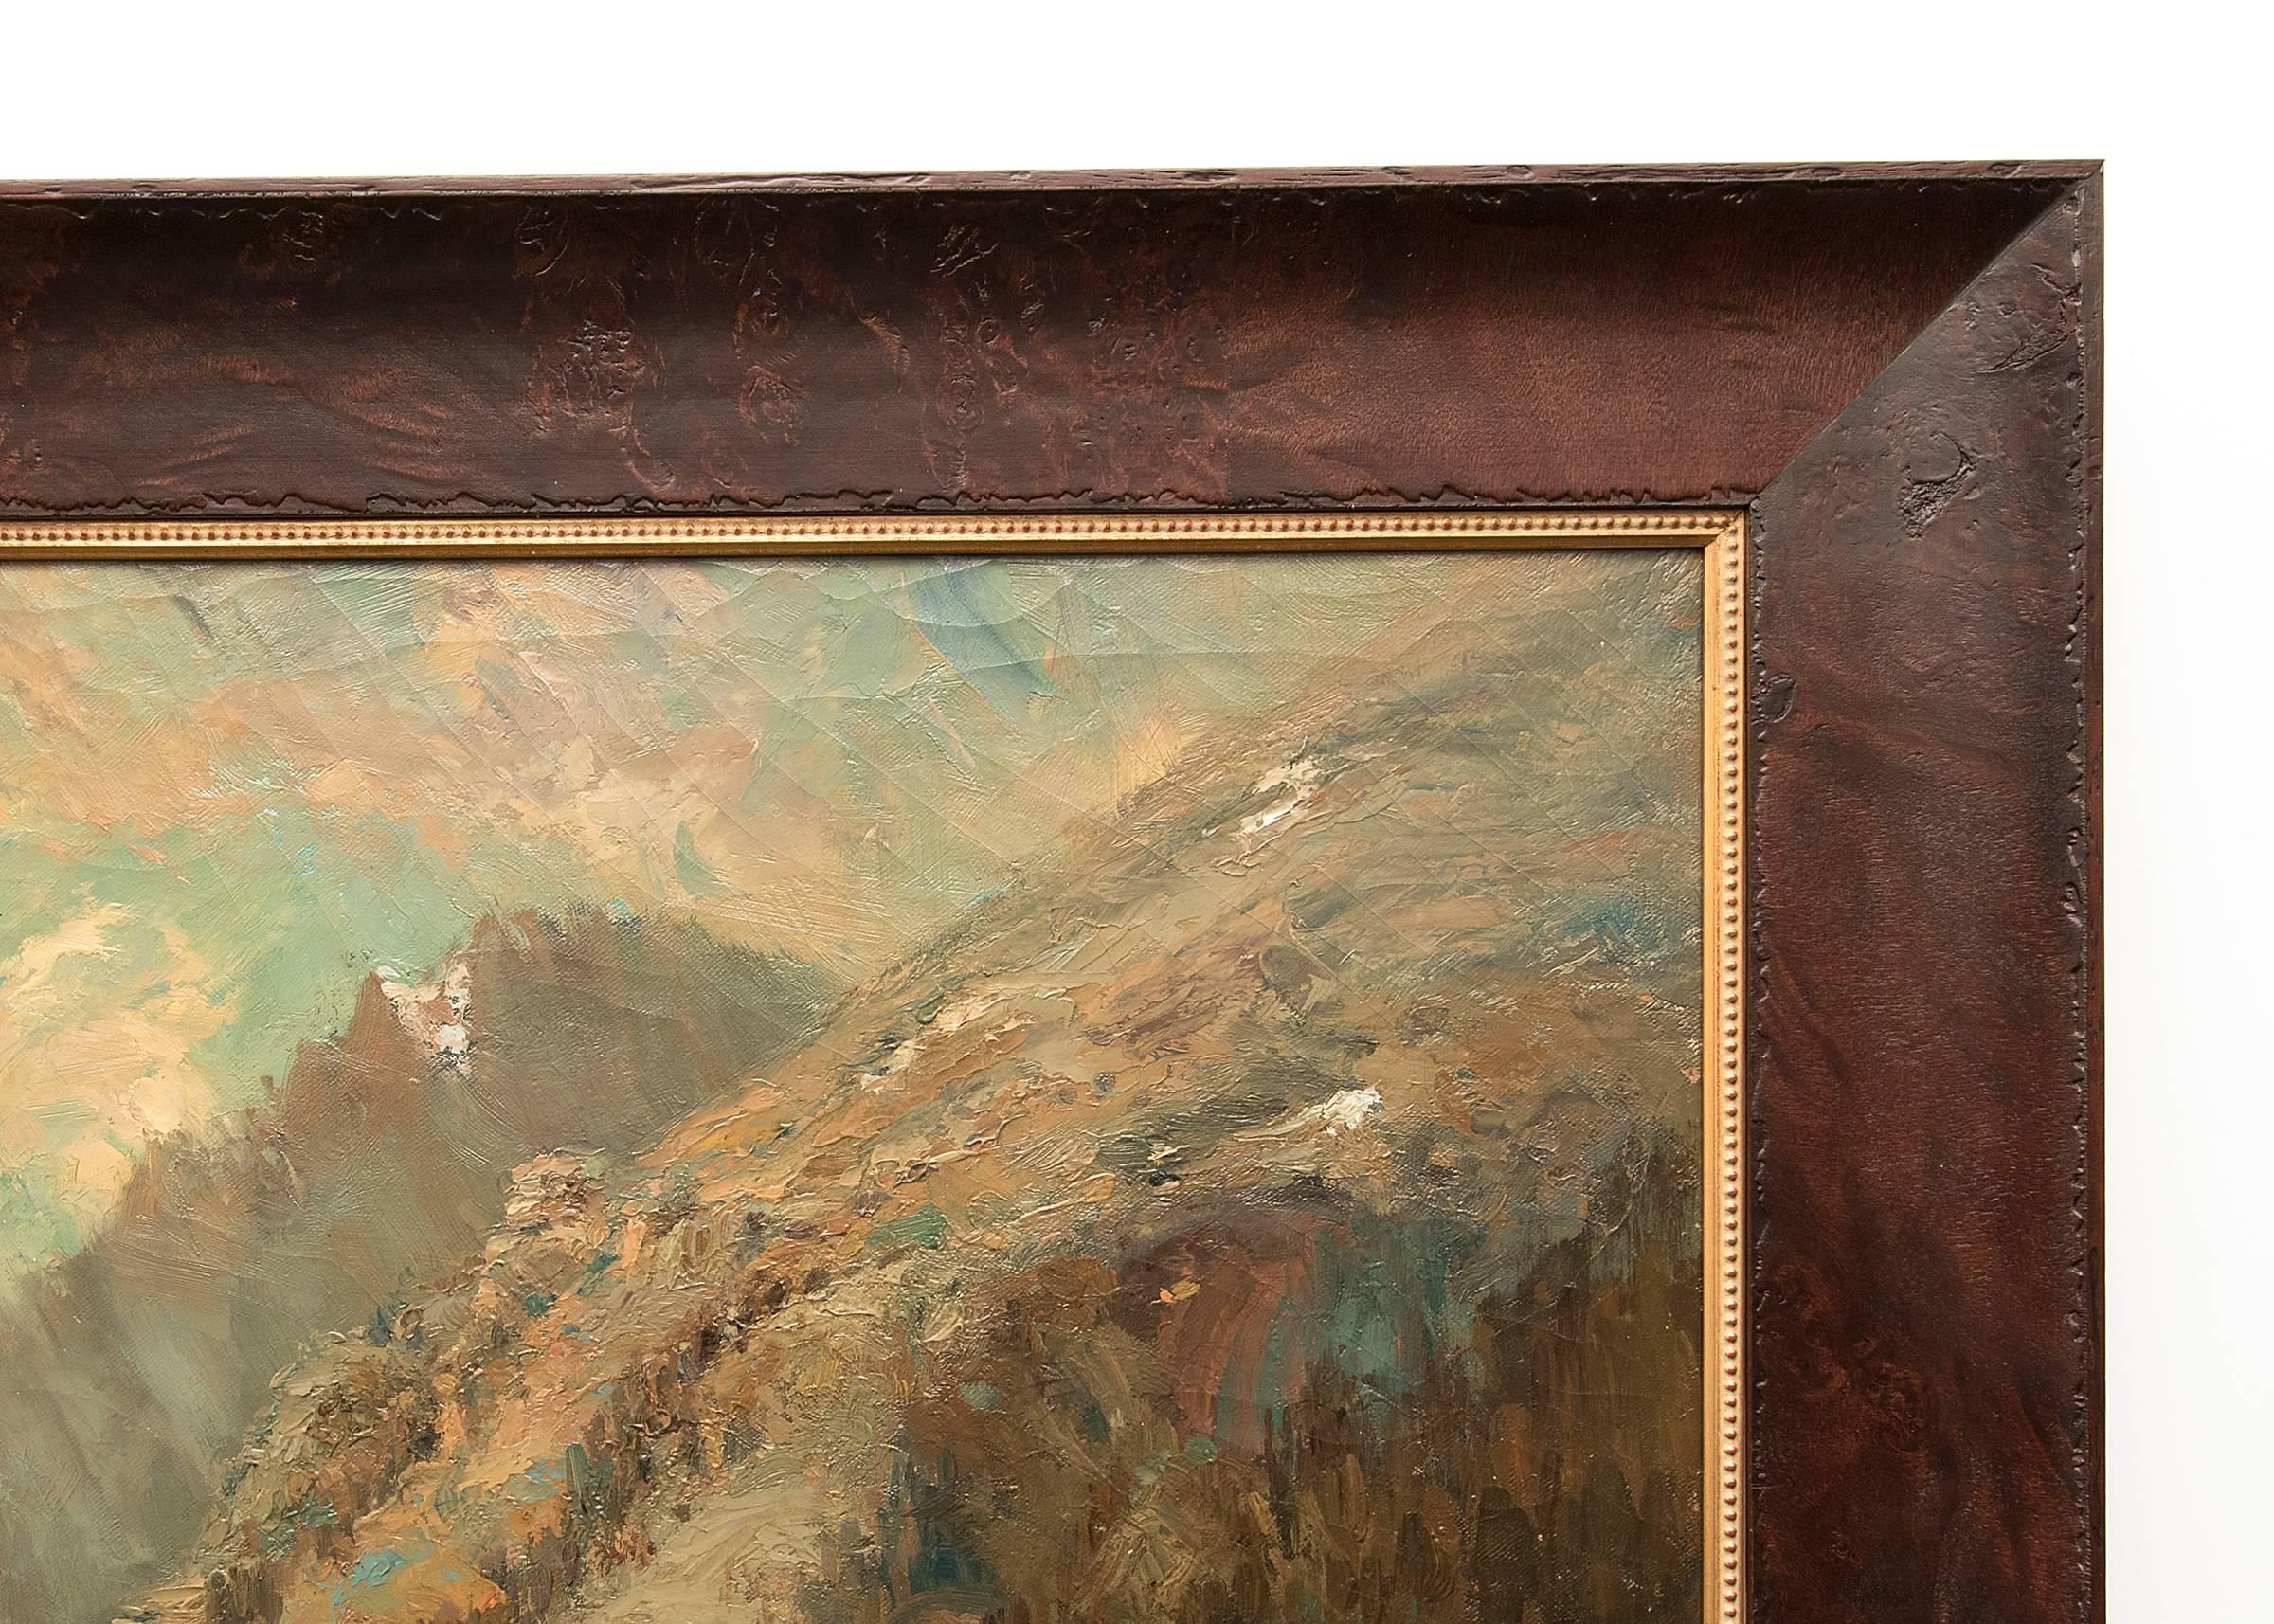 Untitled (Ouray, Colorado) - Brown Landscape Painting by William H. M. (Coxe) Cox